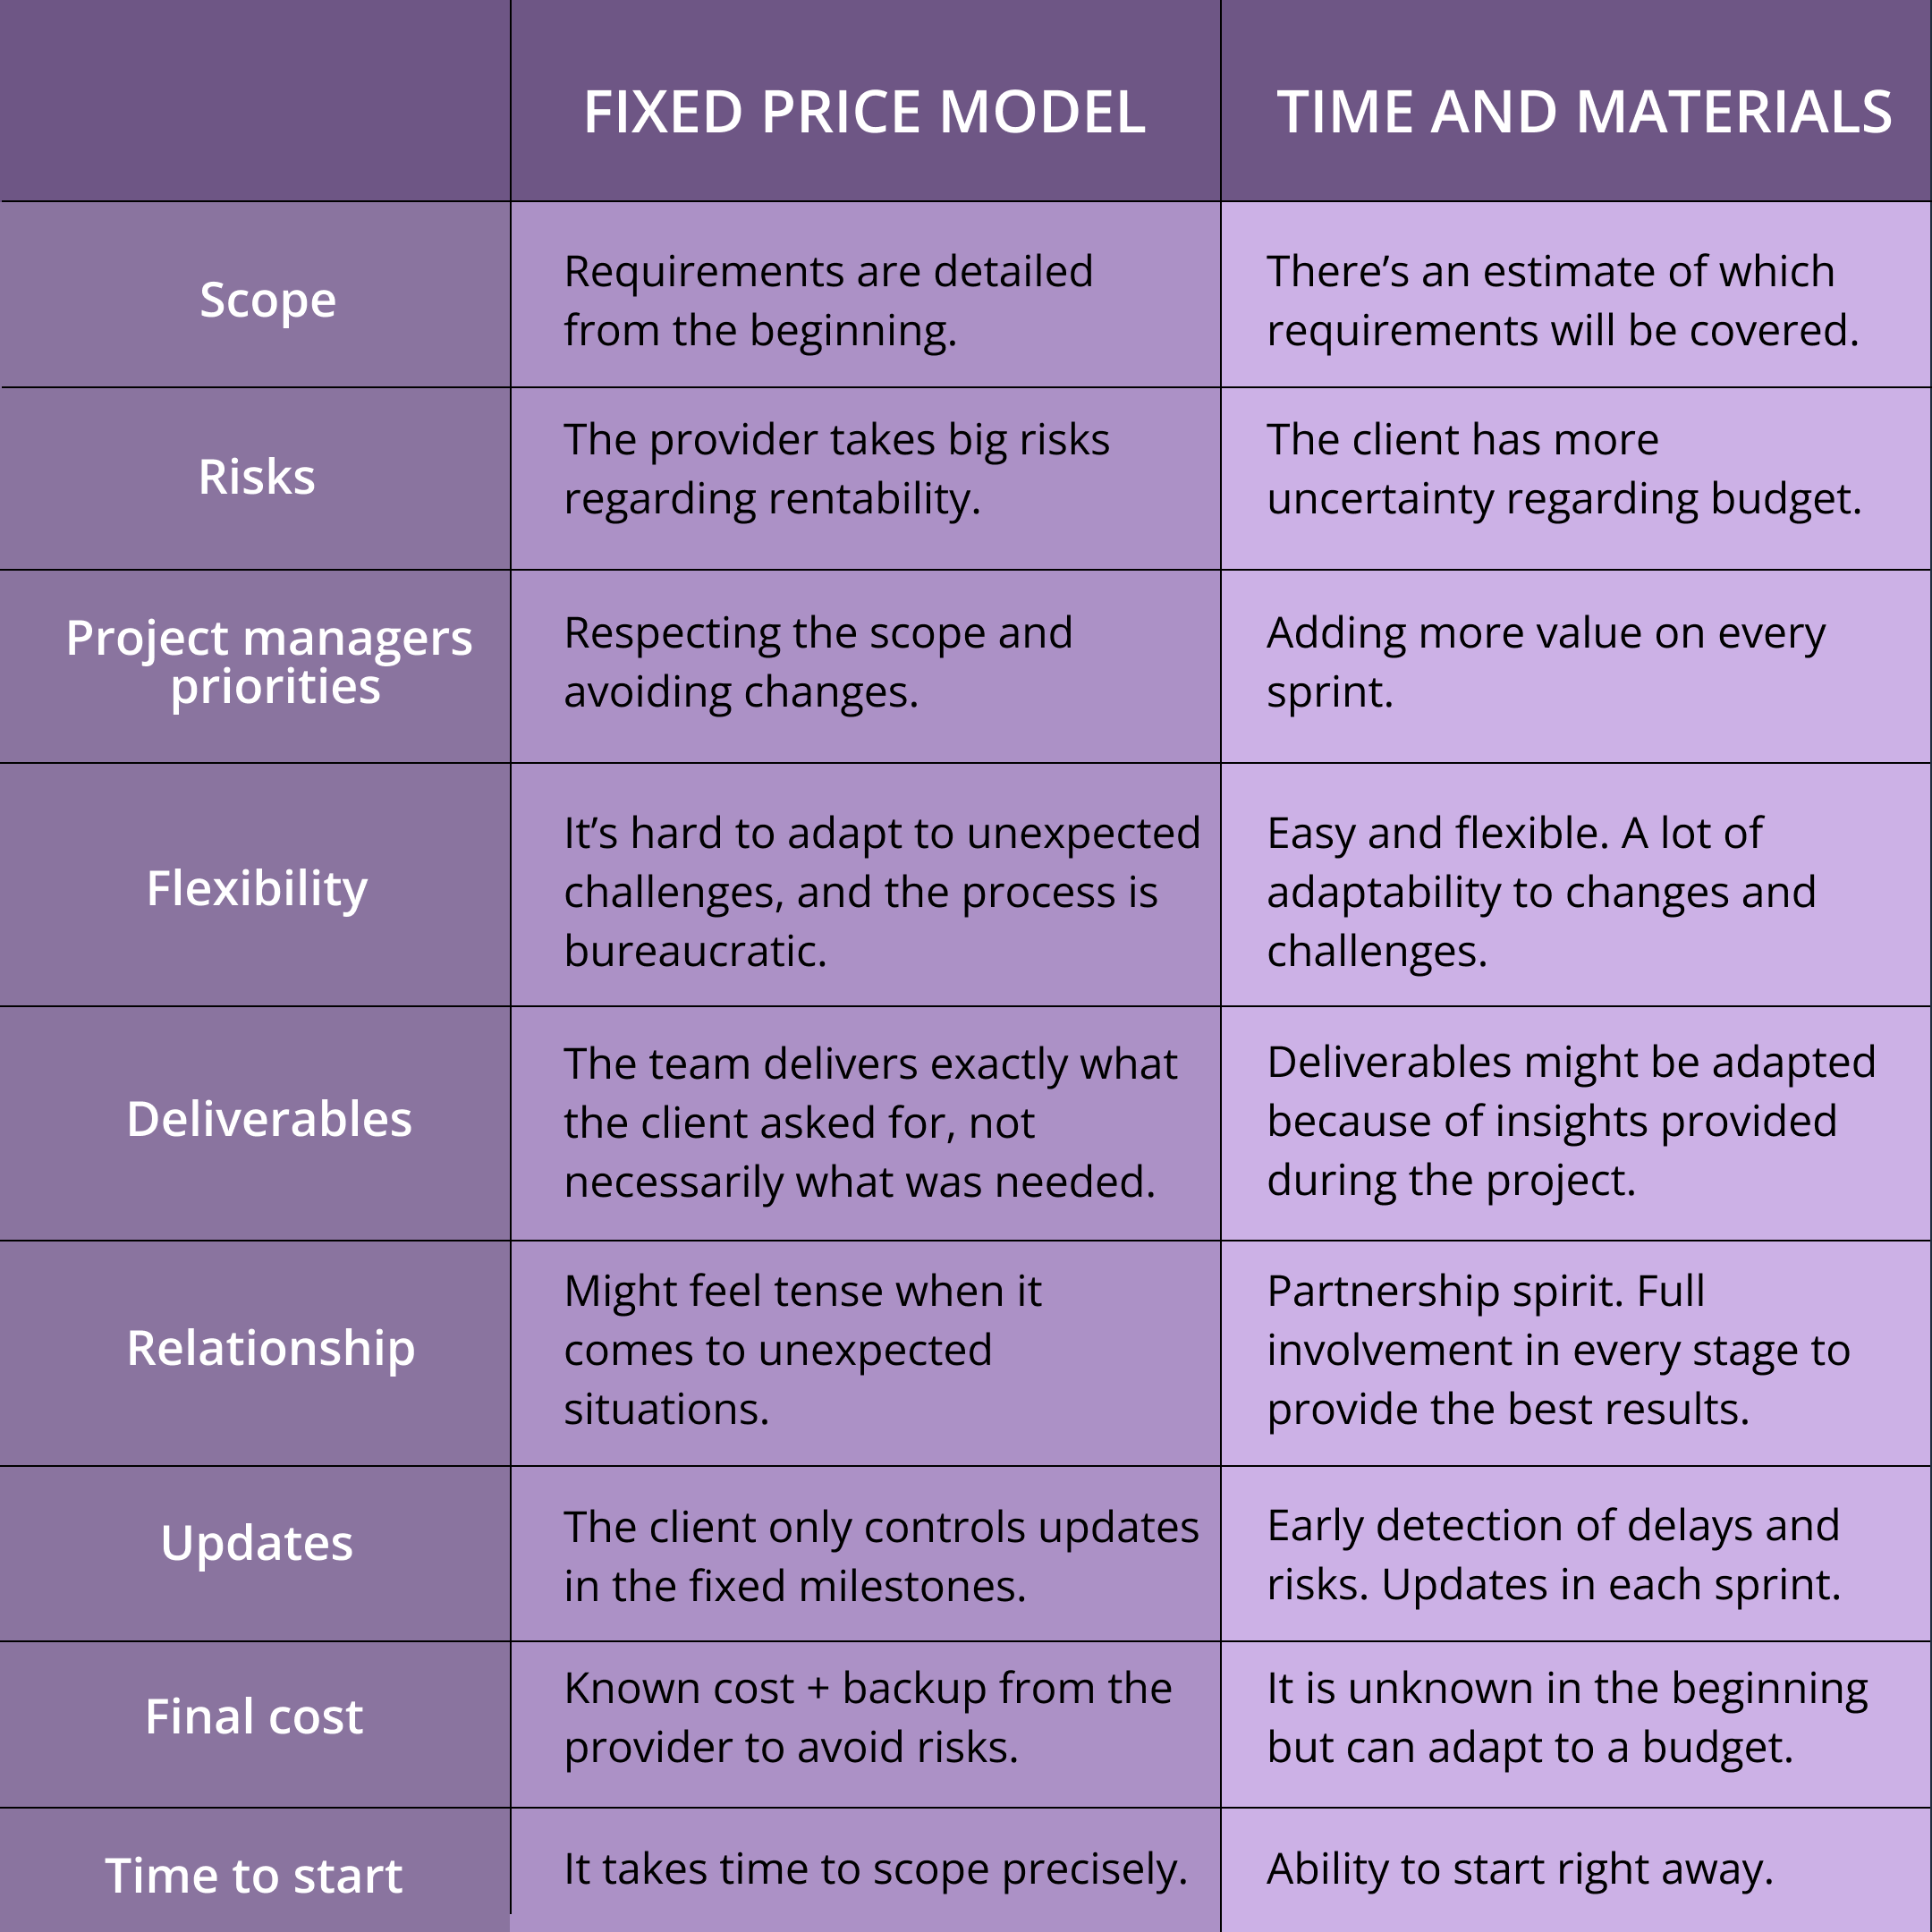 Fixed Price Vs. Time and Materials